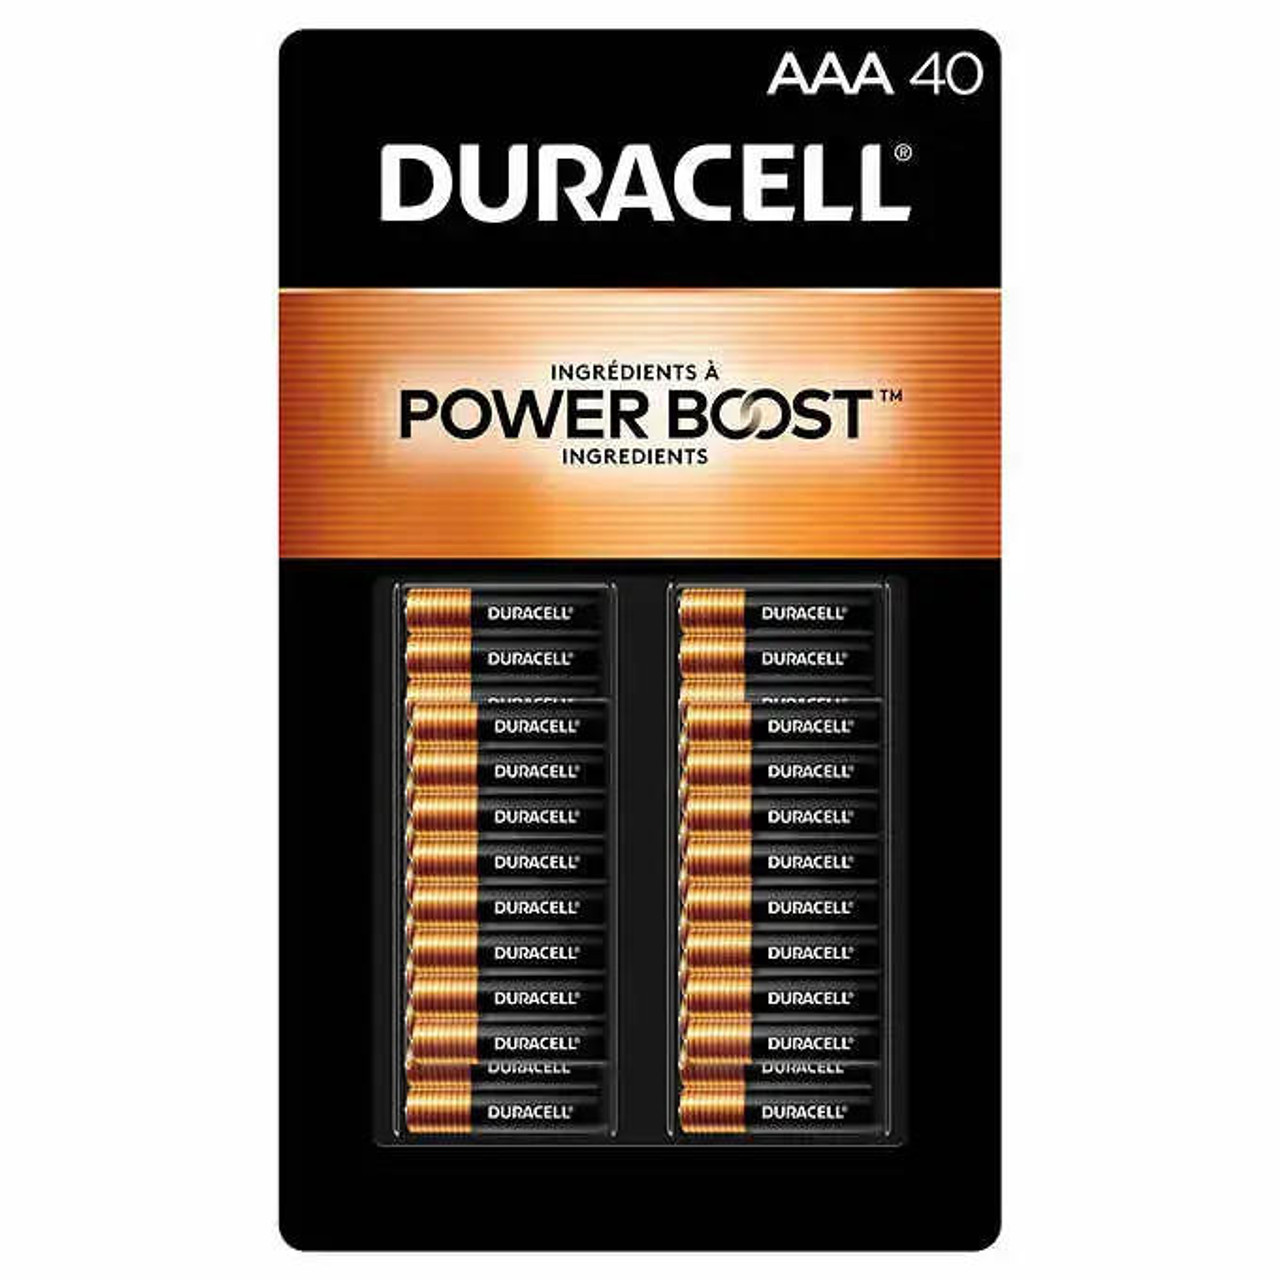 duracell Duracell CopperTop AAA Batteries with PowerBoost Ingredients - 40 count | Enhanced Performance Power 